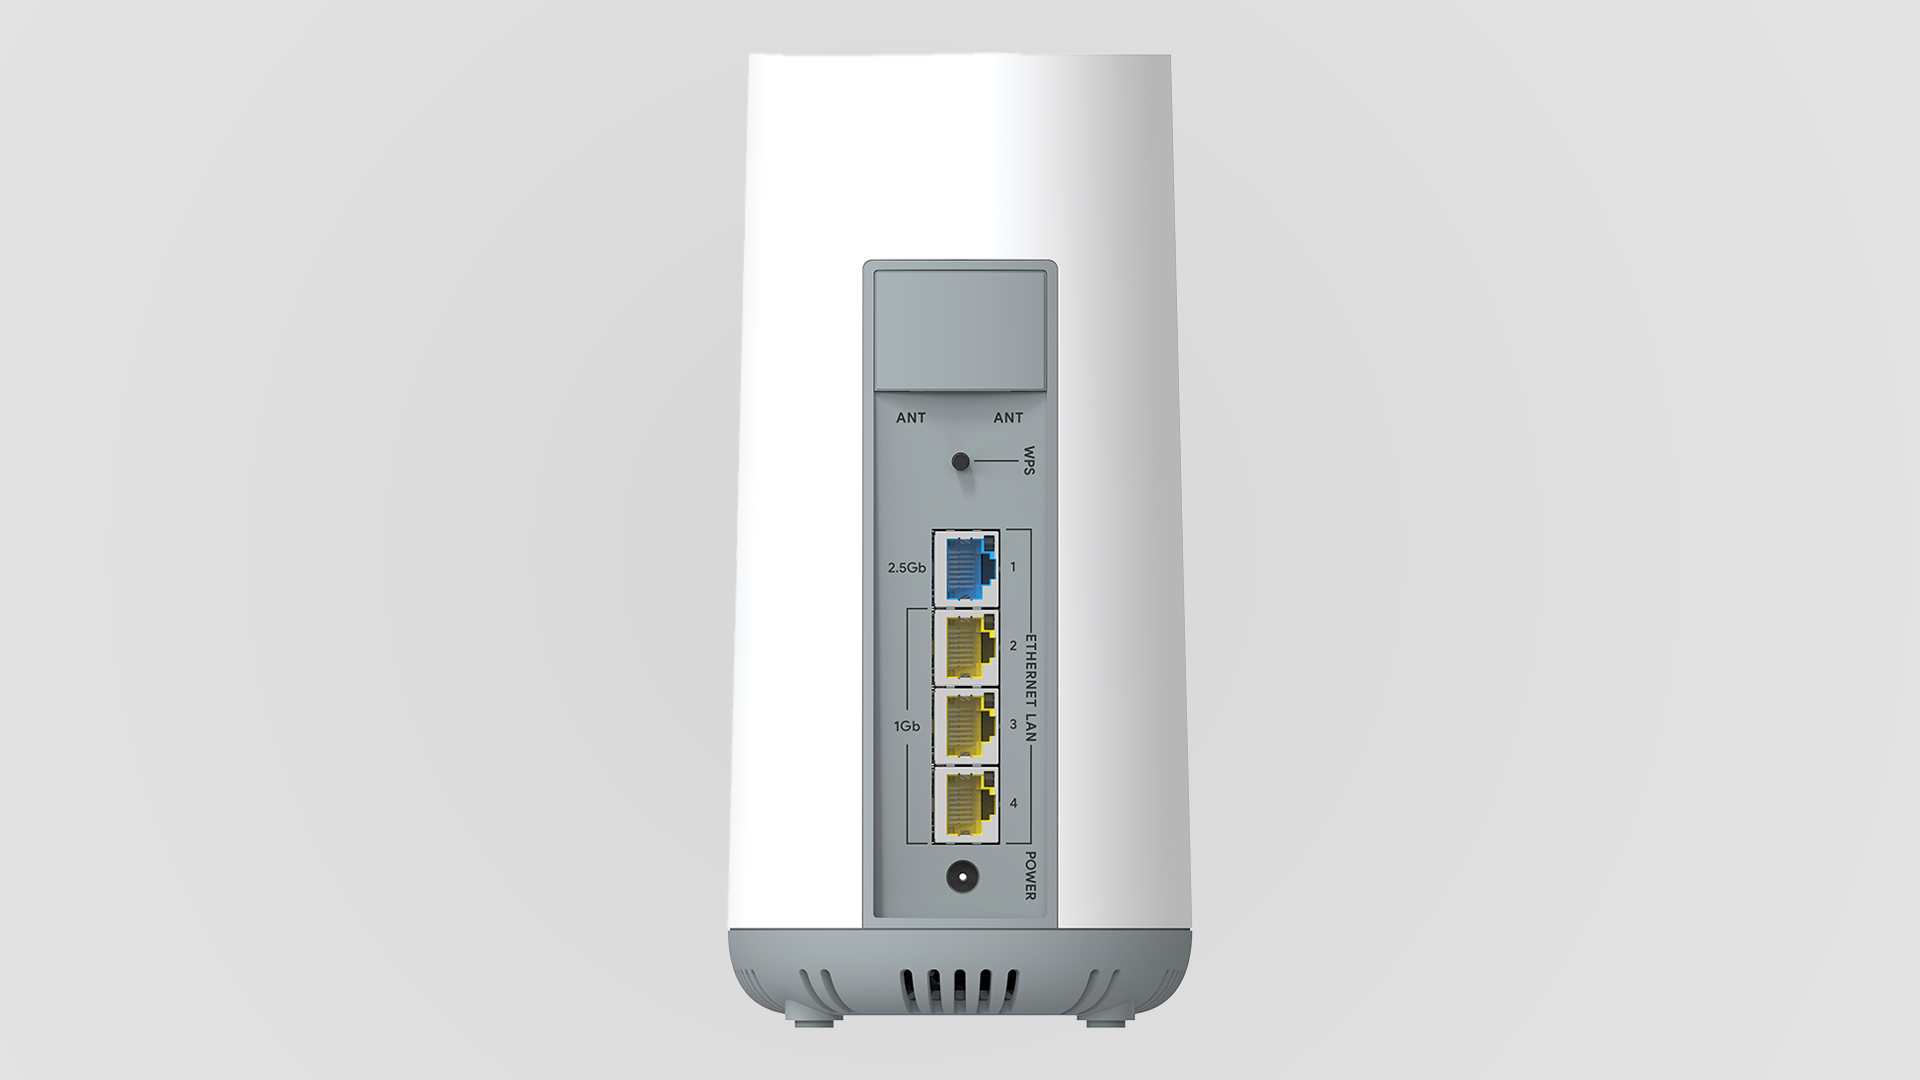 Gateway device; supports wired & Wi-Fi connections and external antenna.